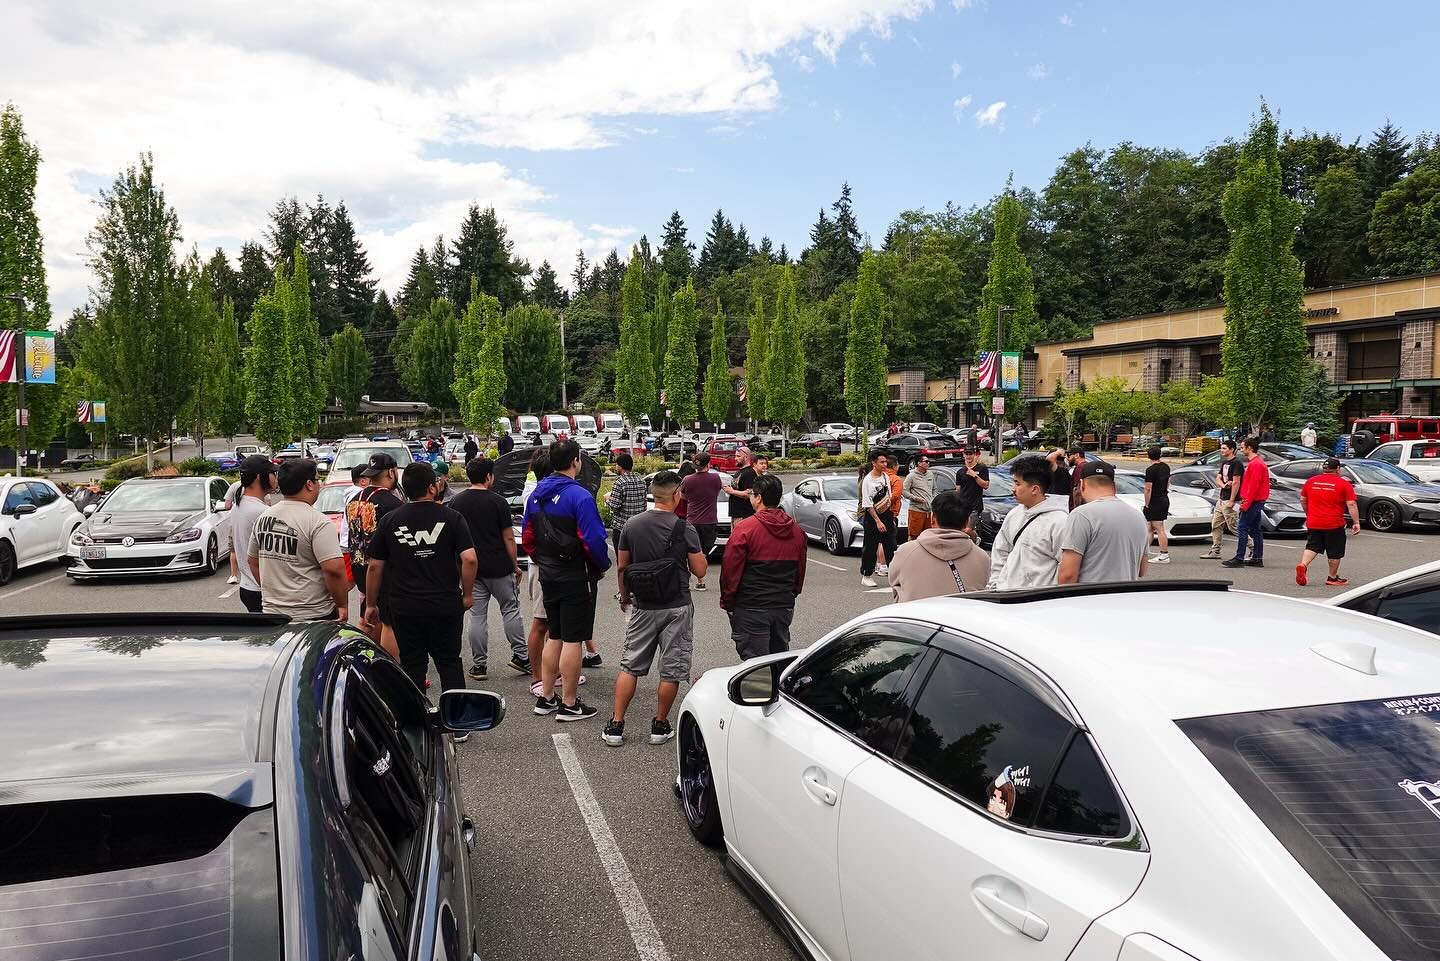 2023, you were good to us. 

From the bottom of our hearts, we appreciate each and every one of you guys for making this past year amazing. From Cars and Coffee to the Pit Stop, each event was special because of you guys! Thank you for making our com